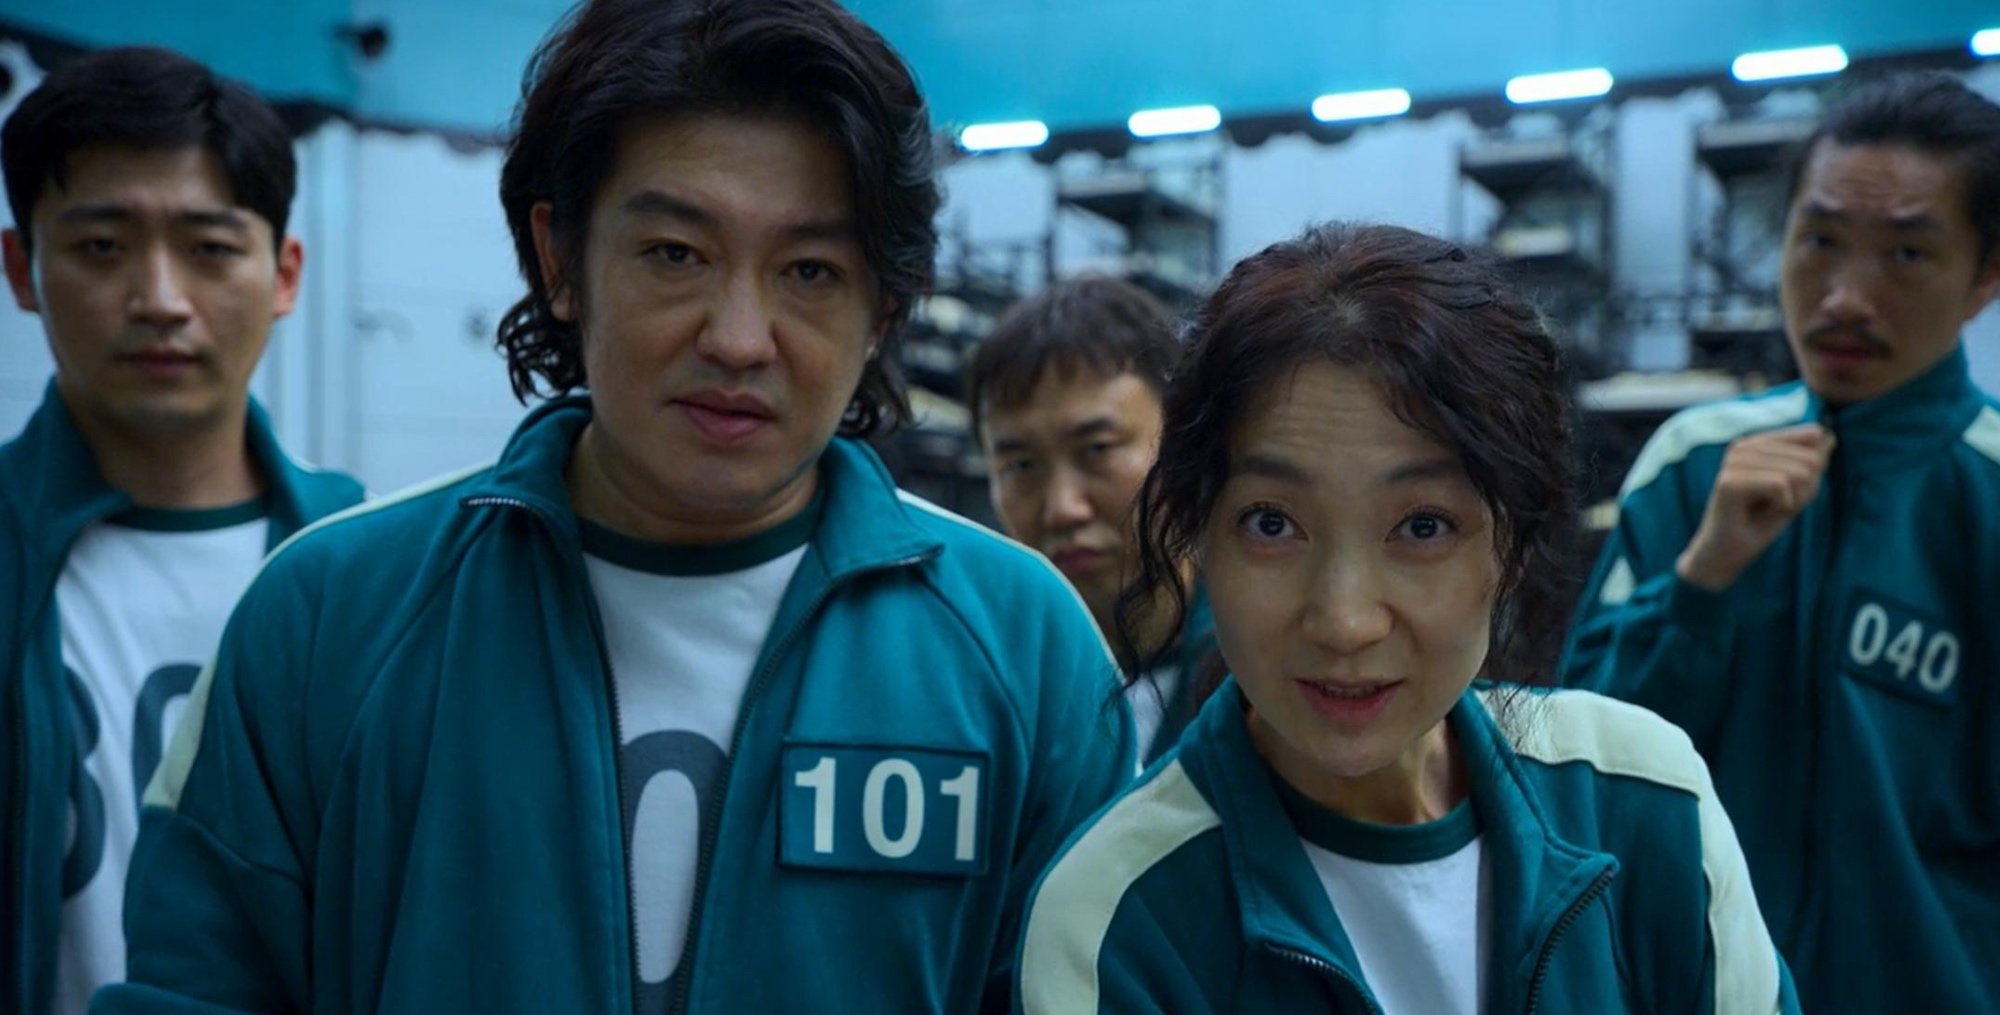 Actors Kim Joo-ryoung and Heo Sung-tae in 'Squid Game' wearing track suits in relation to sex scene.